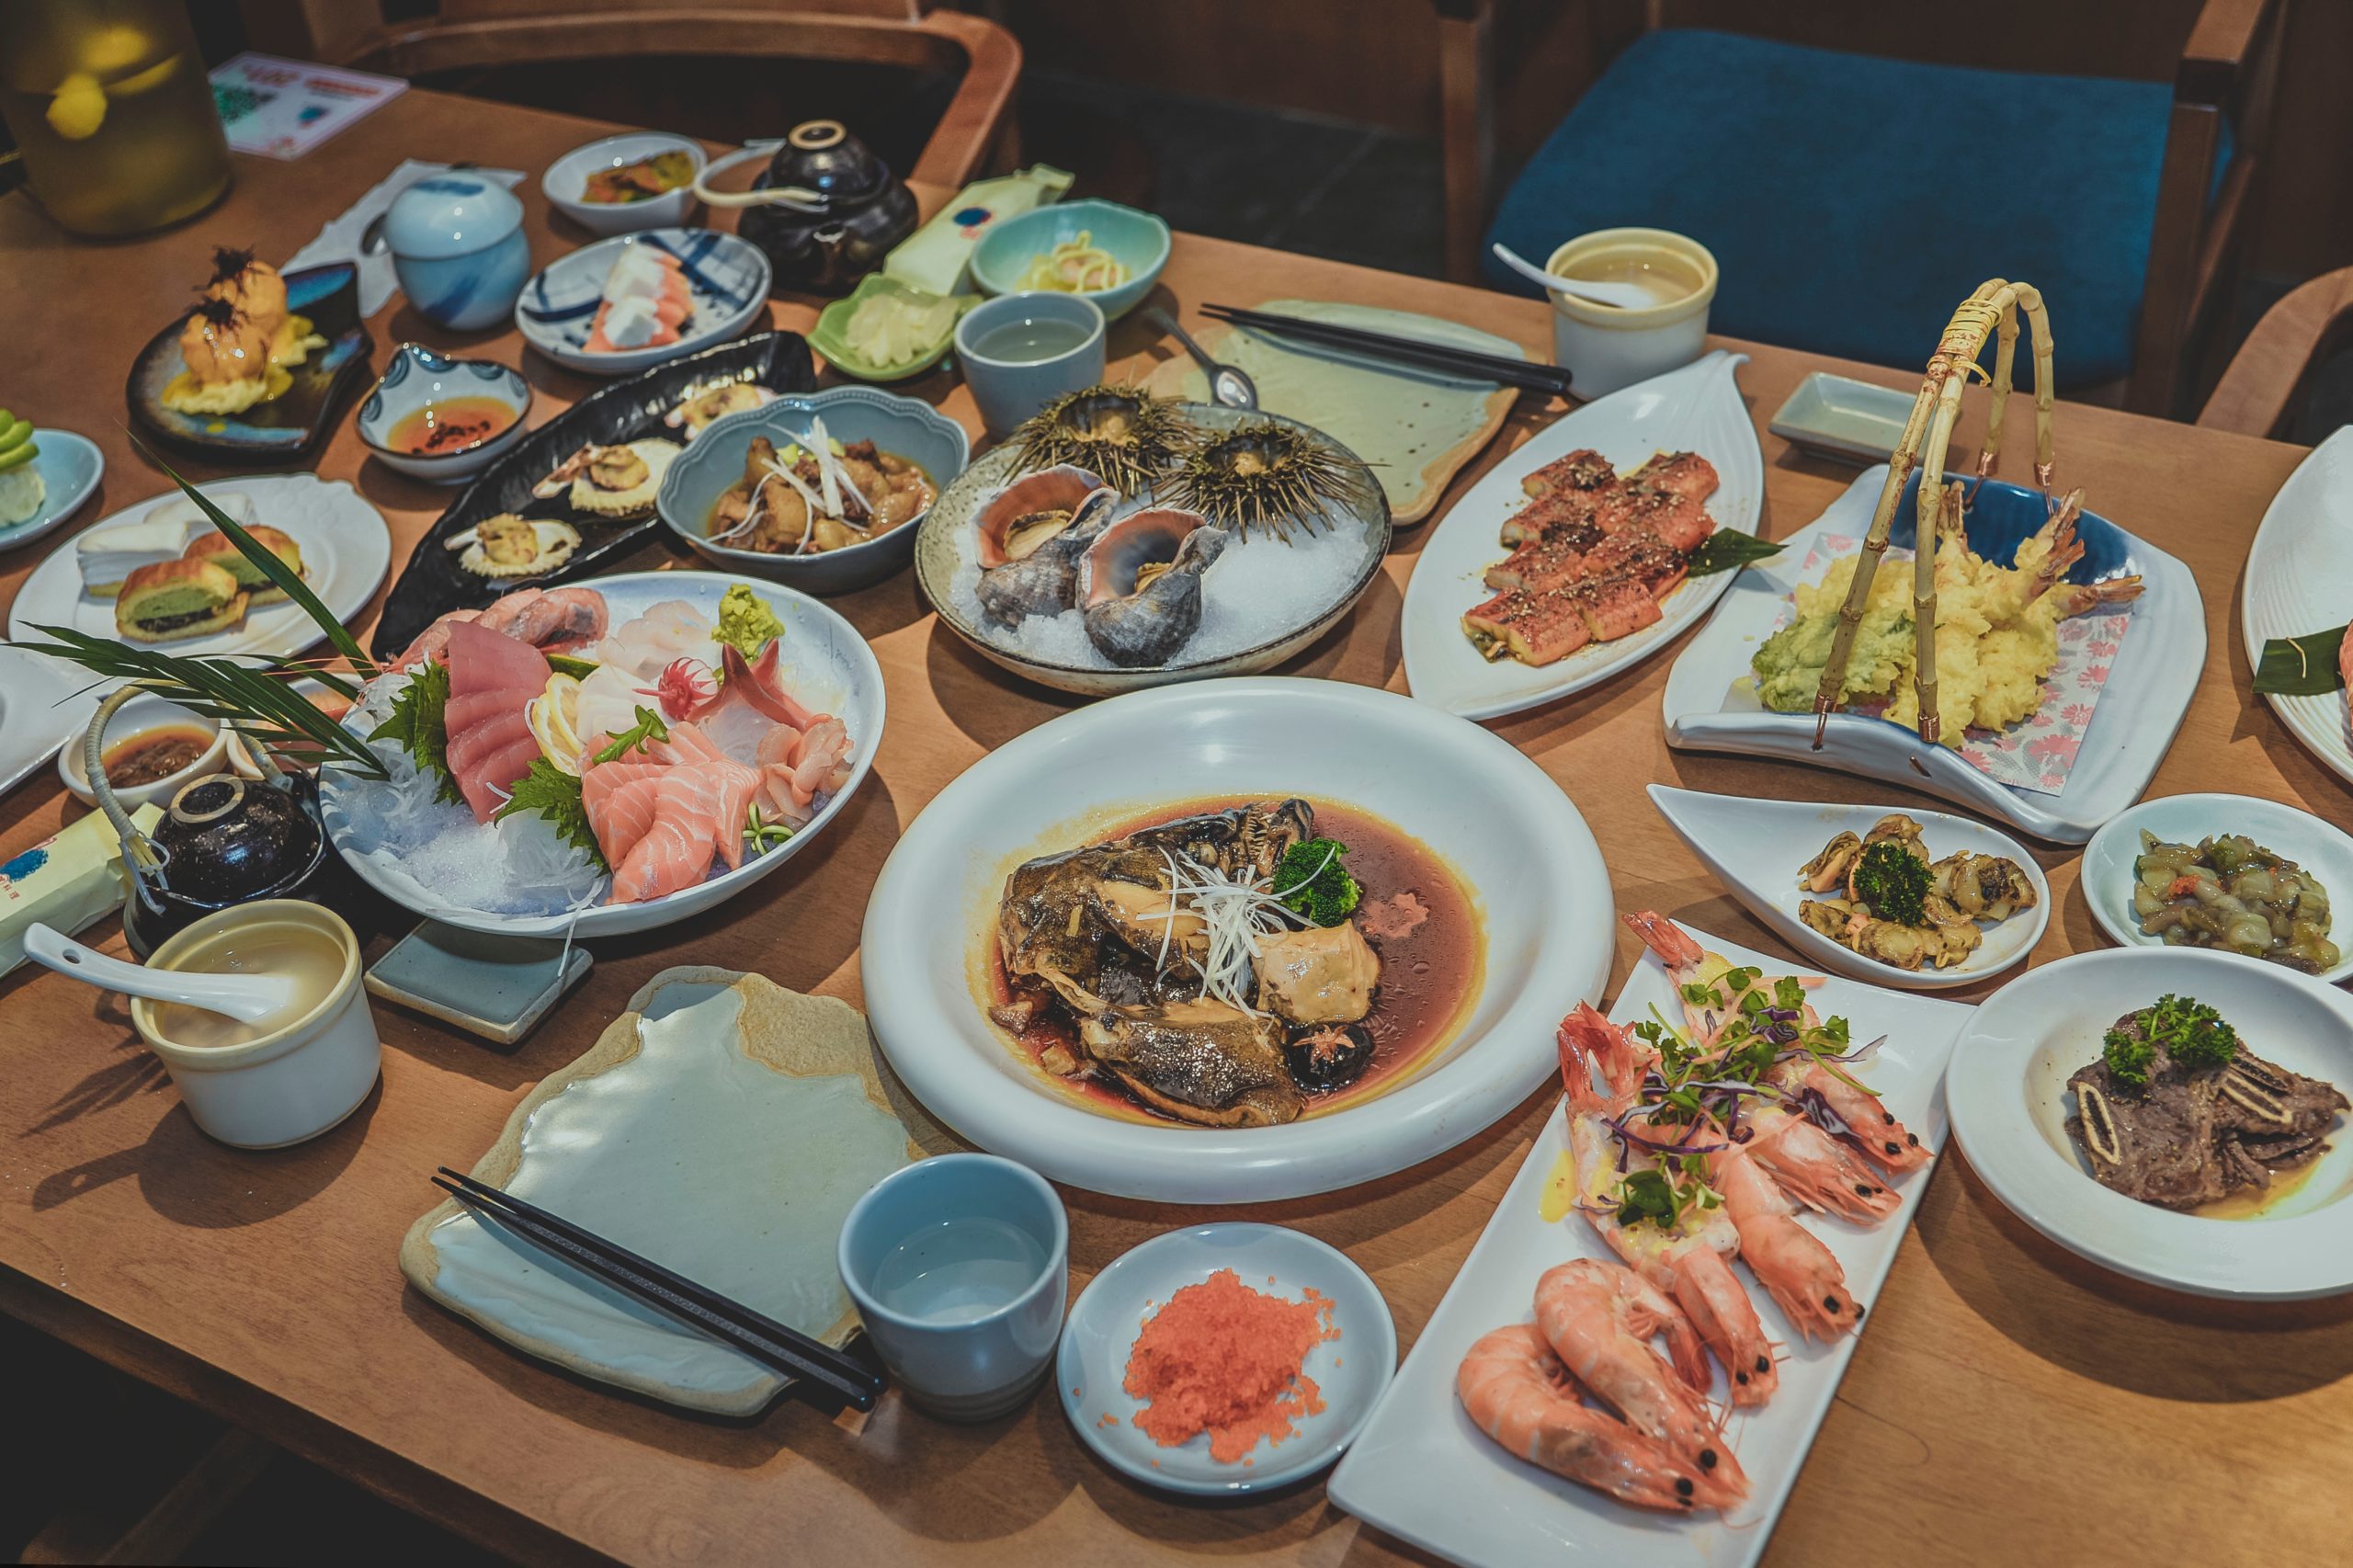 Indulge in the delicious local cuisine while maximising your cultural immersion in Japan